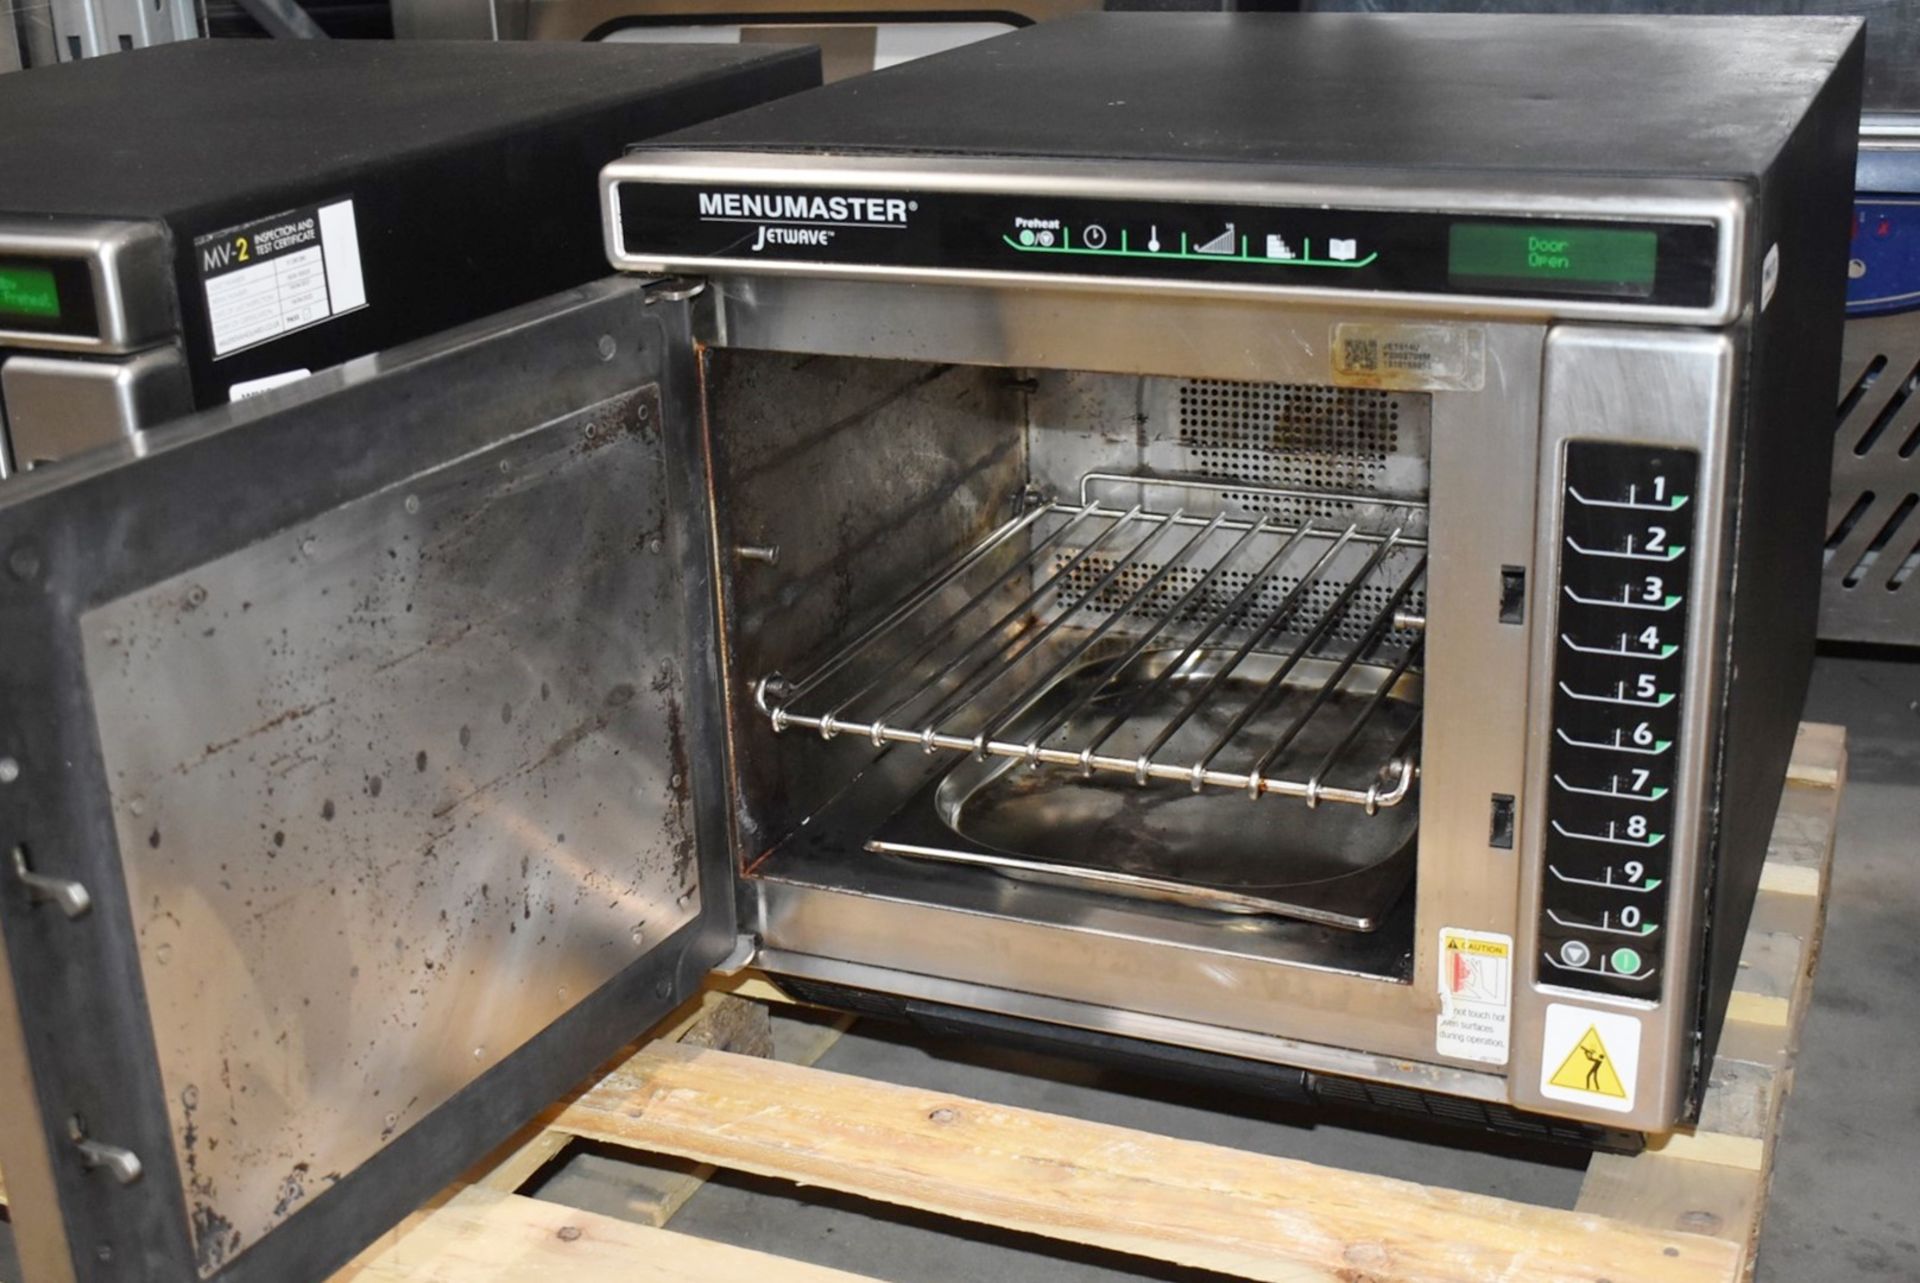 1 x Menumaster Jetwave JET514U High Speed Combination Microwave Oven - RRP £2,400 - Recently Removed - Image 3 of 11